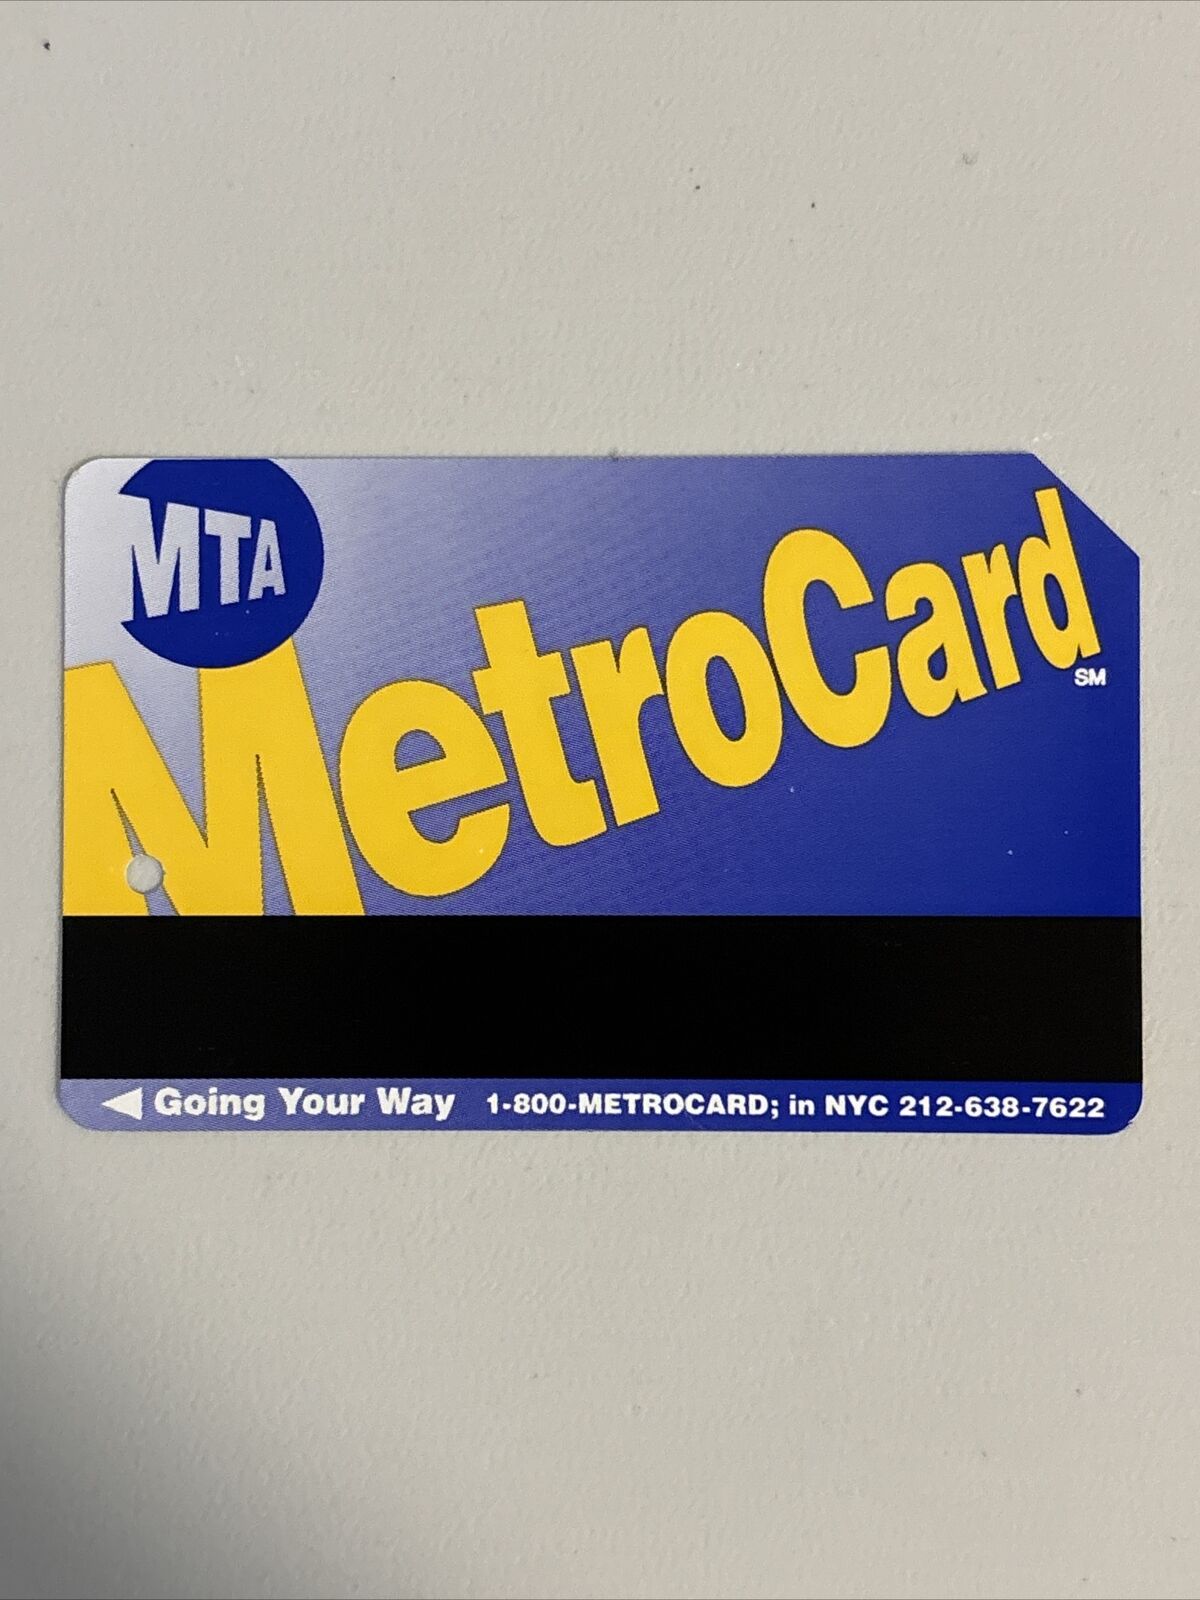 MTA MetroCard  For Test Only Blueback  Exp. 2000 RARE NYC Subway NYCT